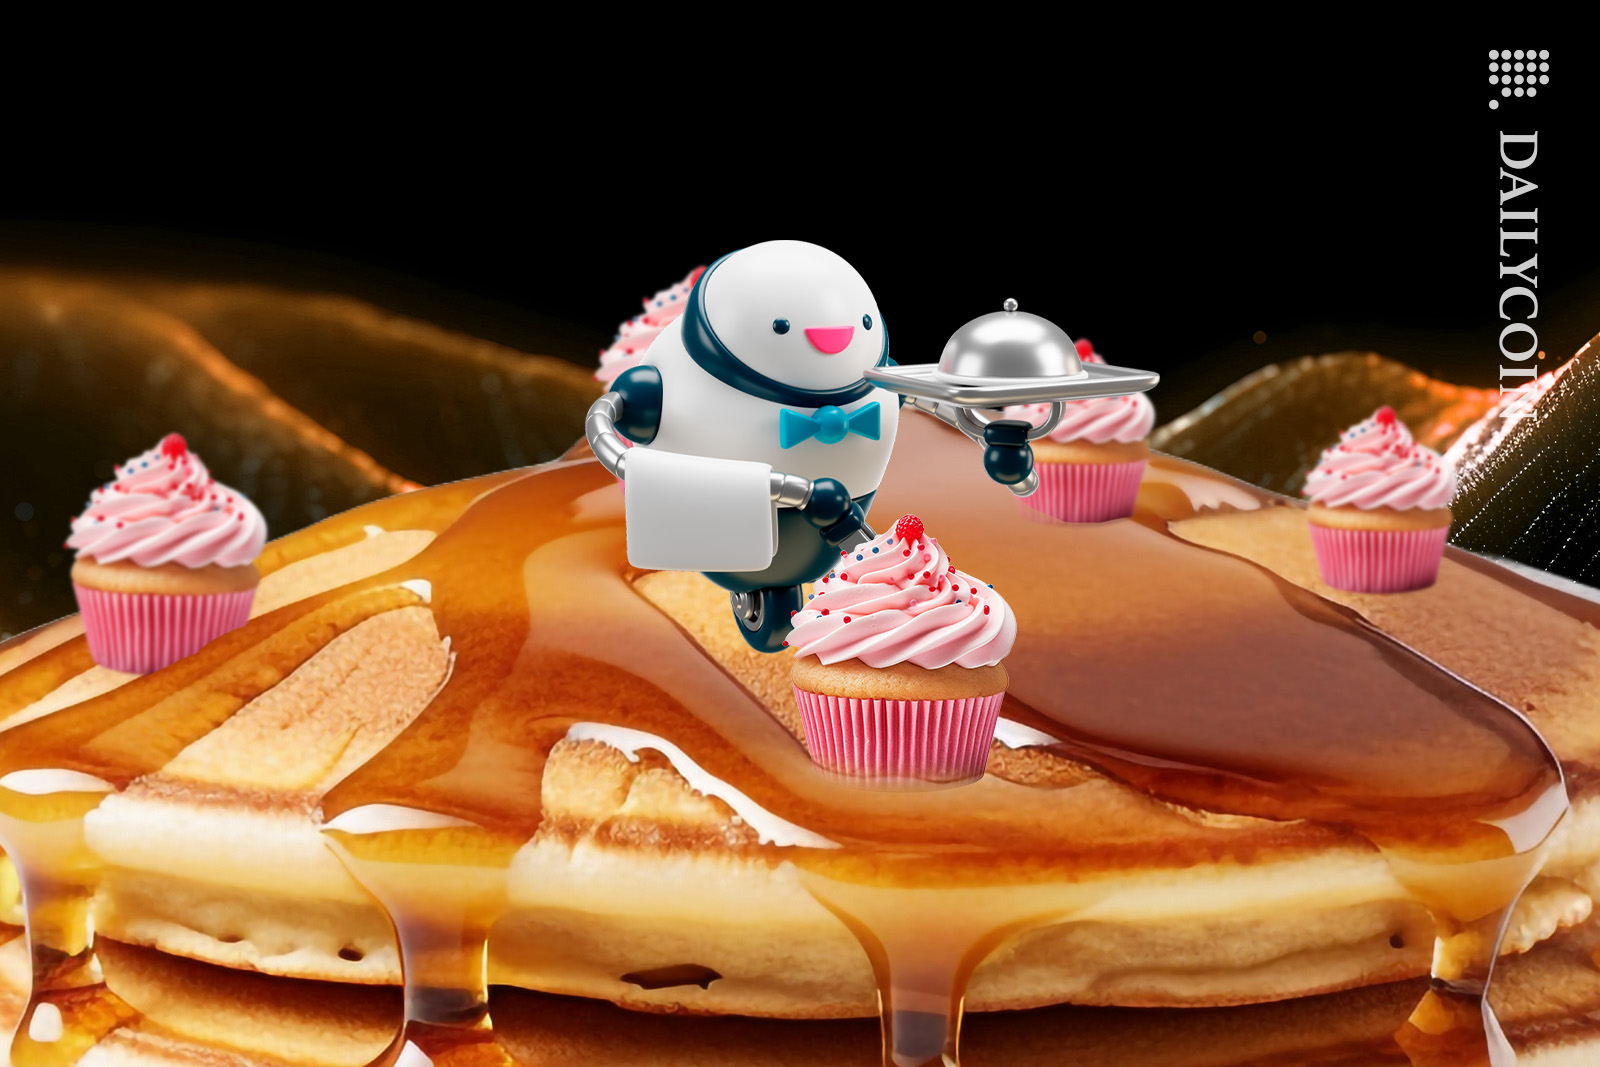 Little robot serving little cup cakes on a massive pancake in a digital land.